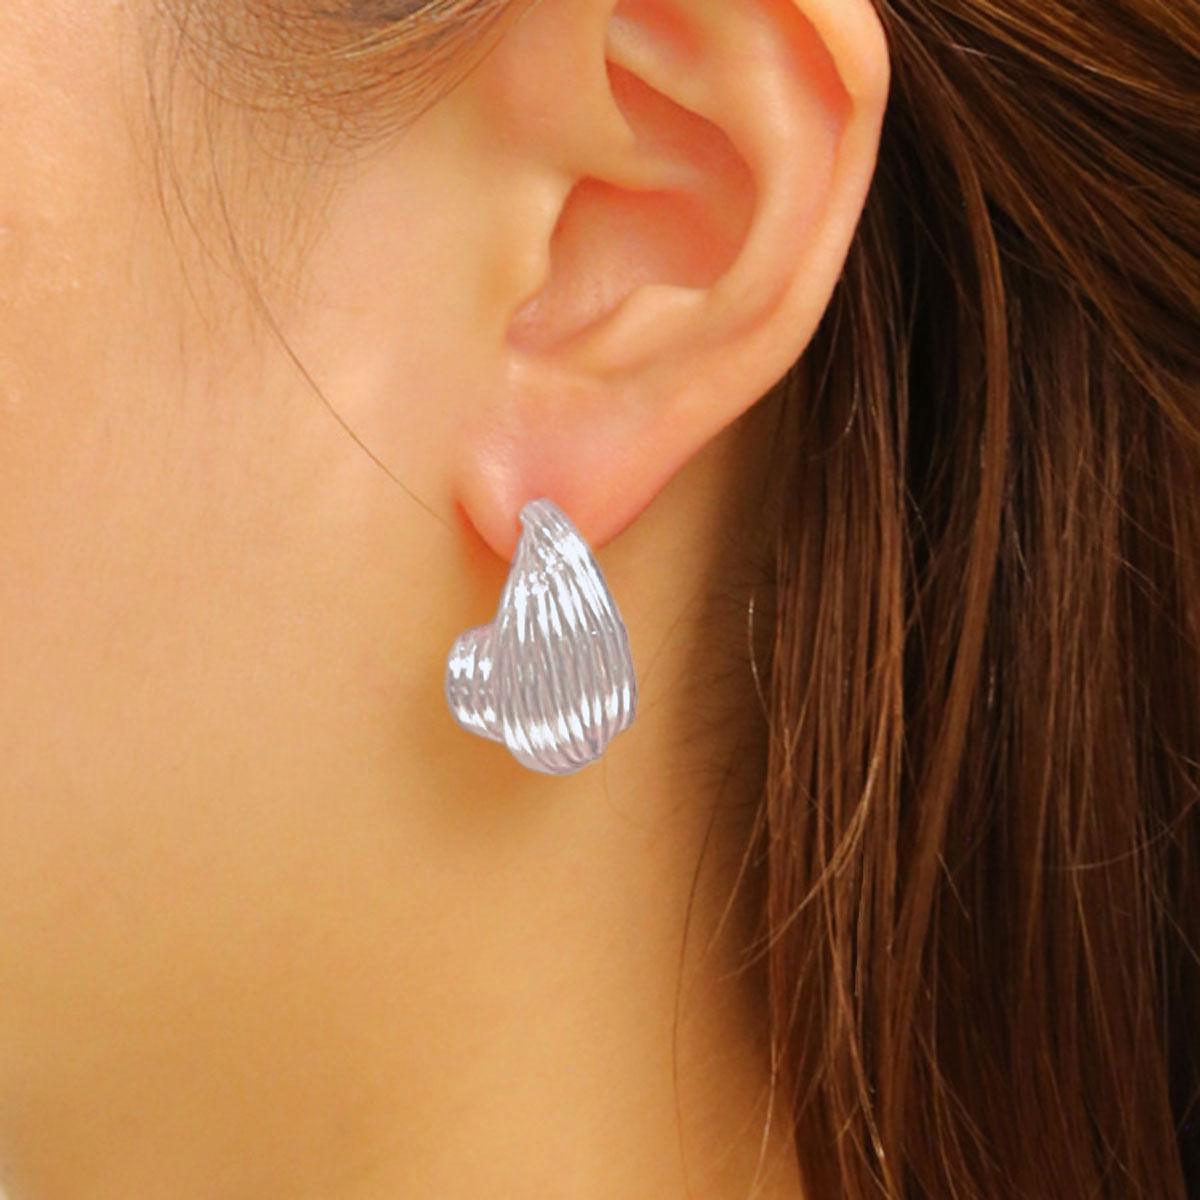 Dazzle All Day: White Gold Spiral Small Earrings, the Ultimate Fashion Jewelry Accessory